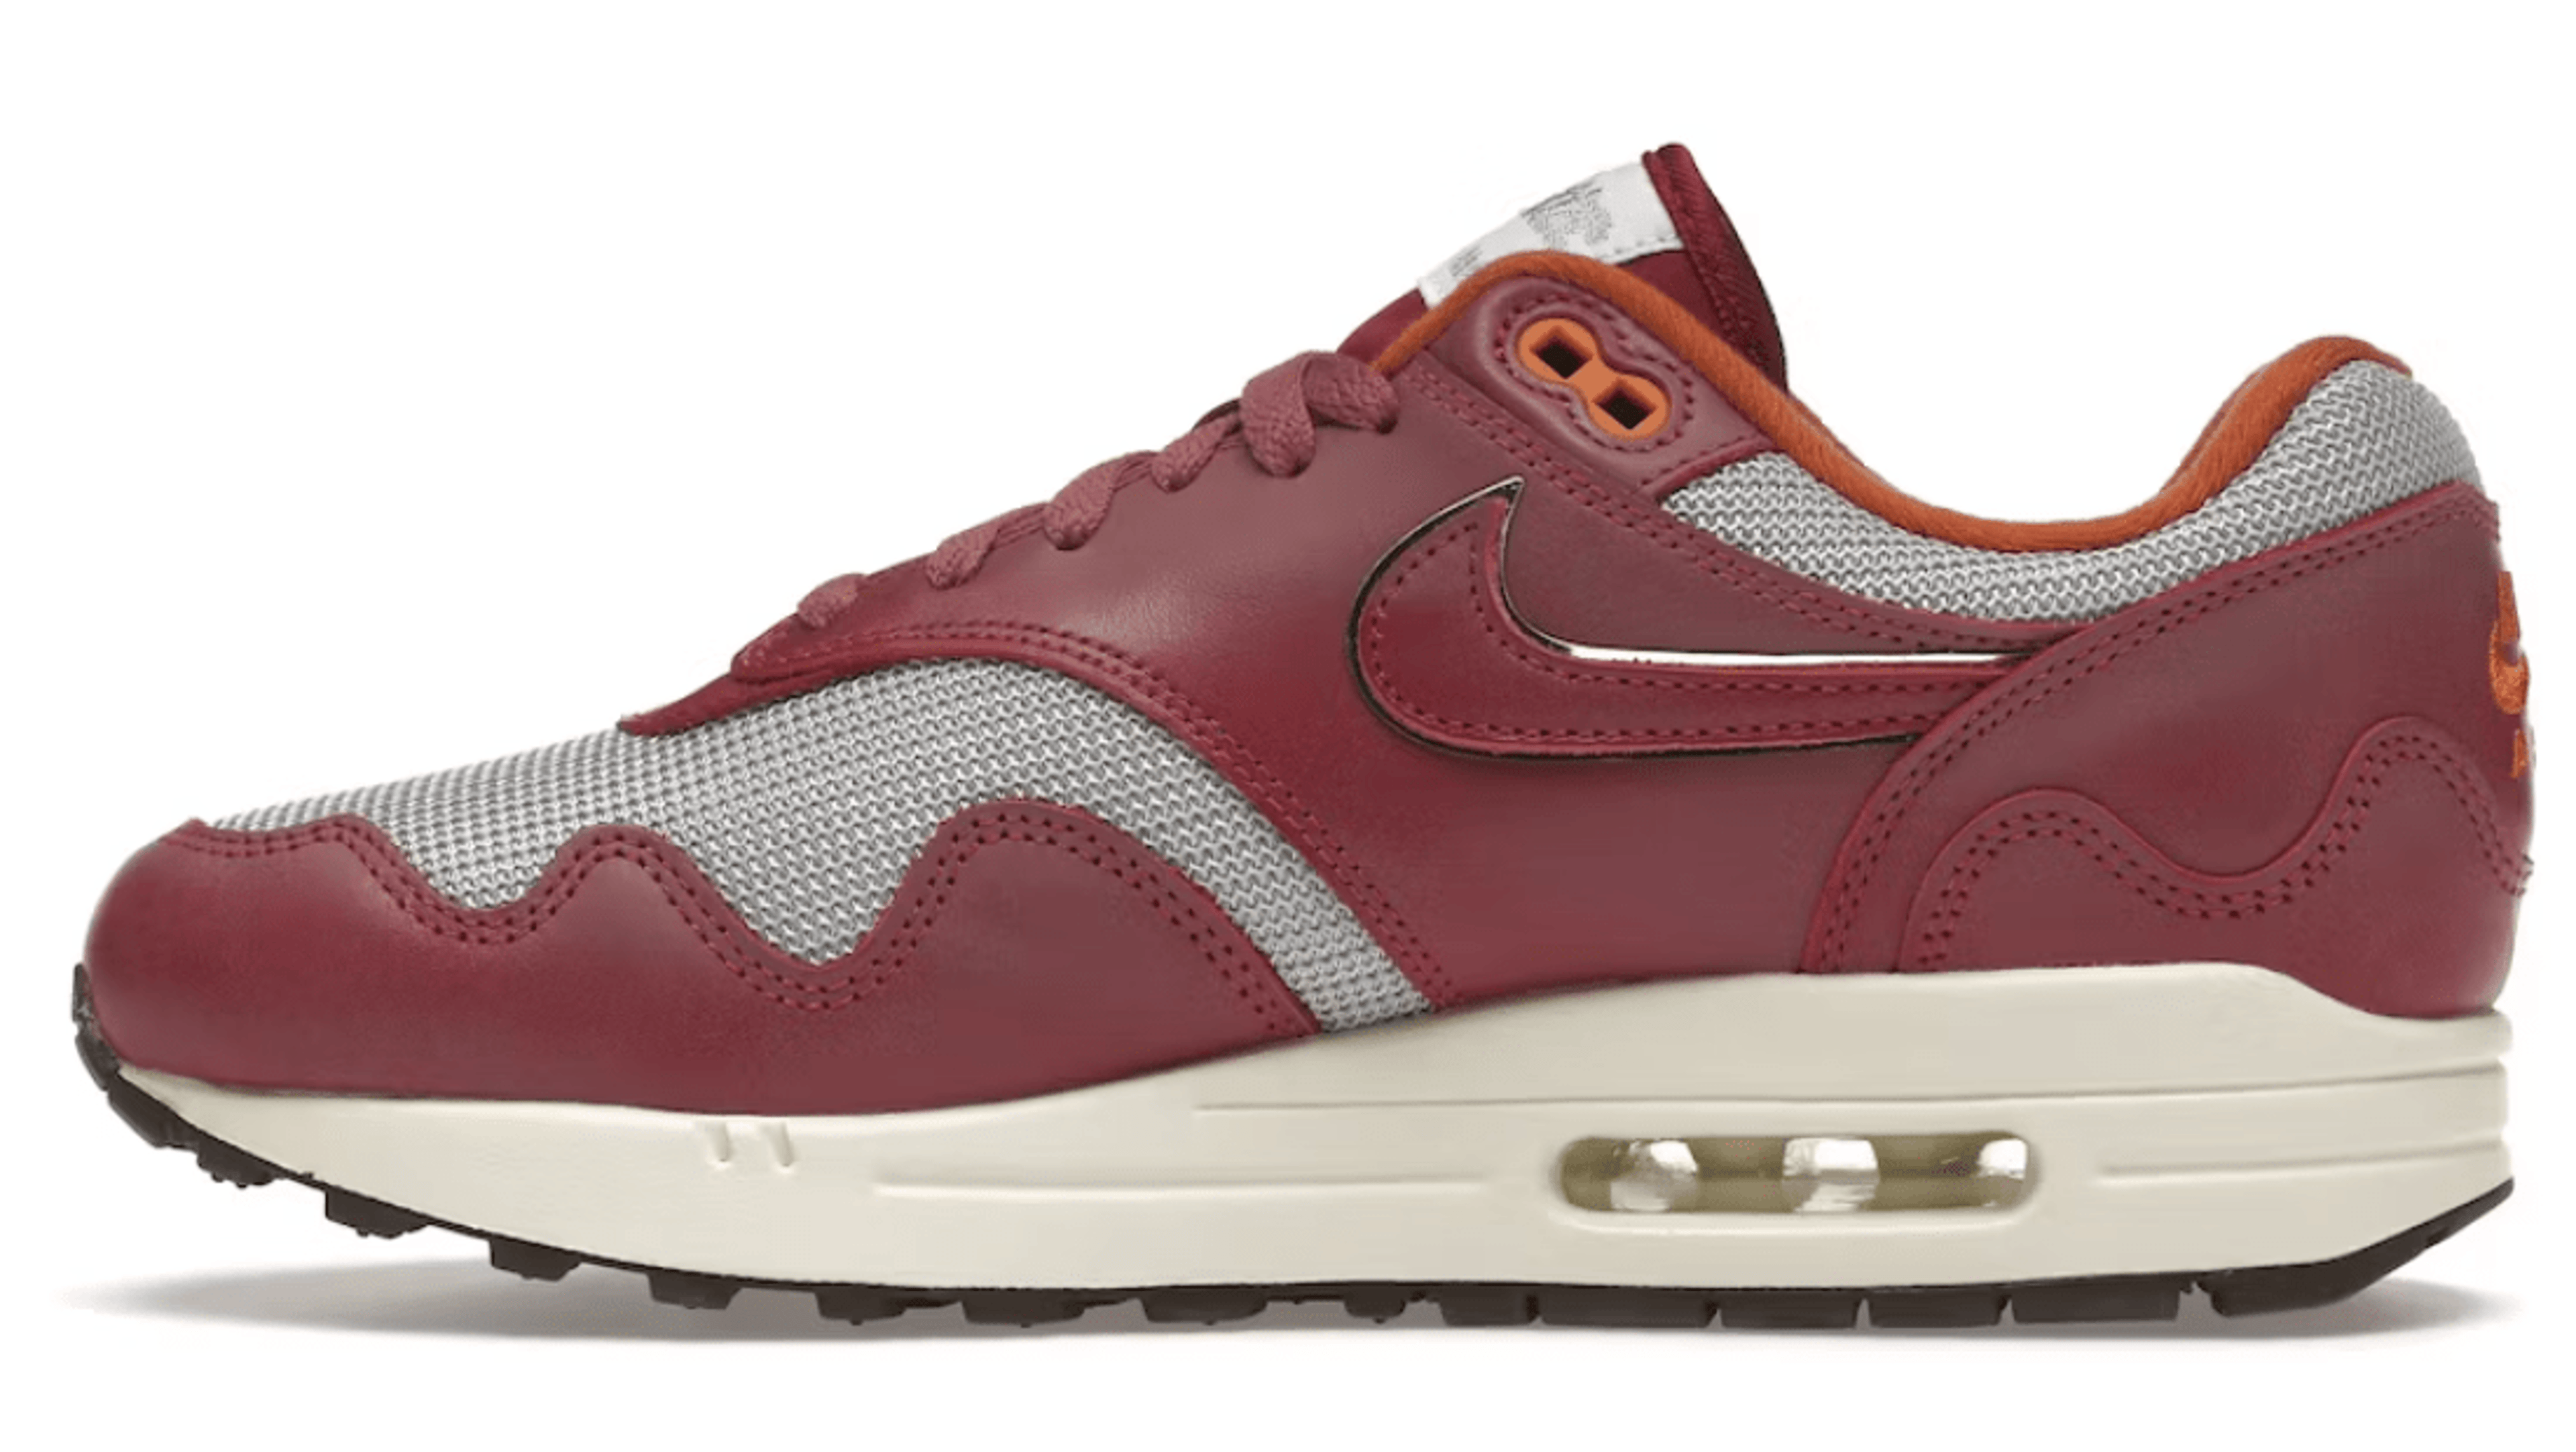 Alternate View 1 of Nike Air Max 1 Patta Waves Rush Maroon (with Bracelet)